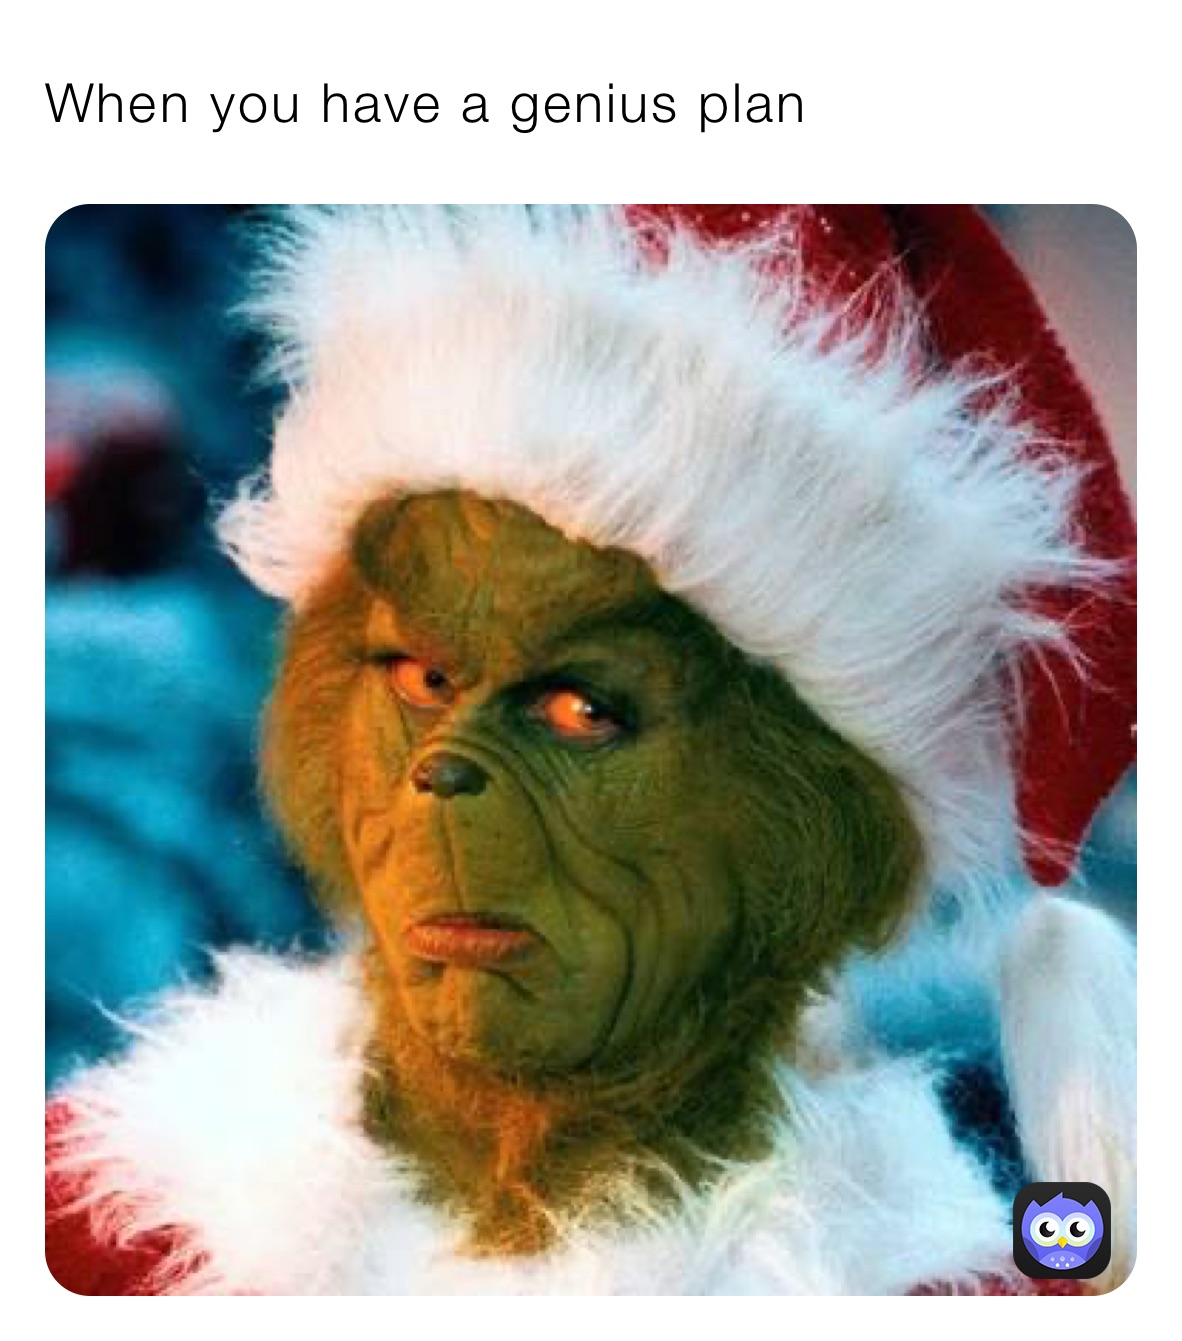 When you have a genius plan